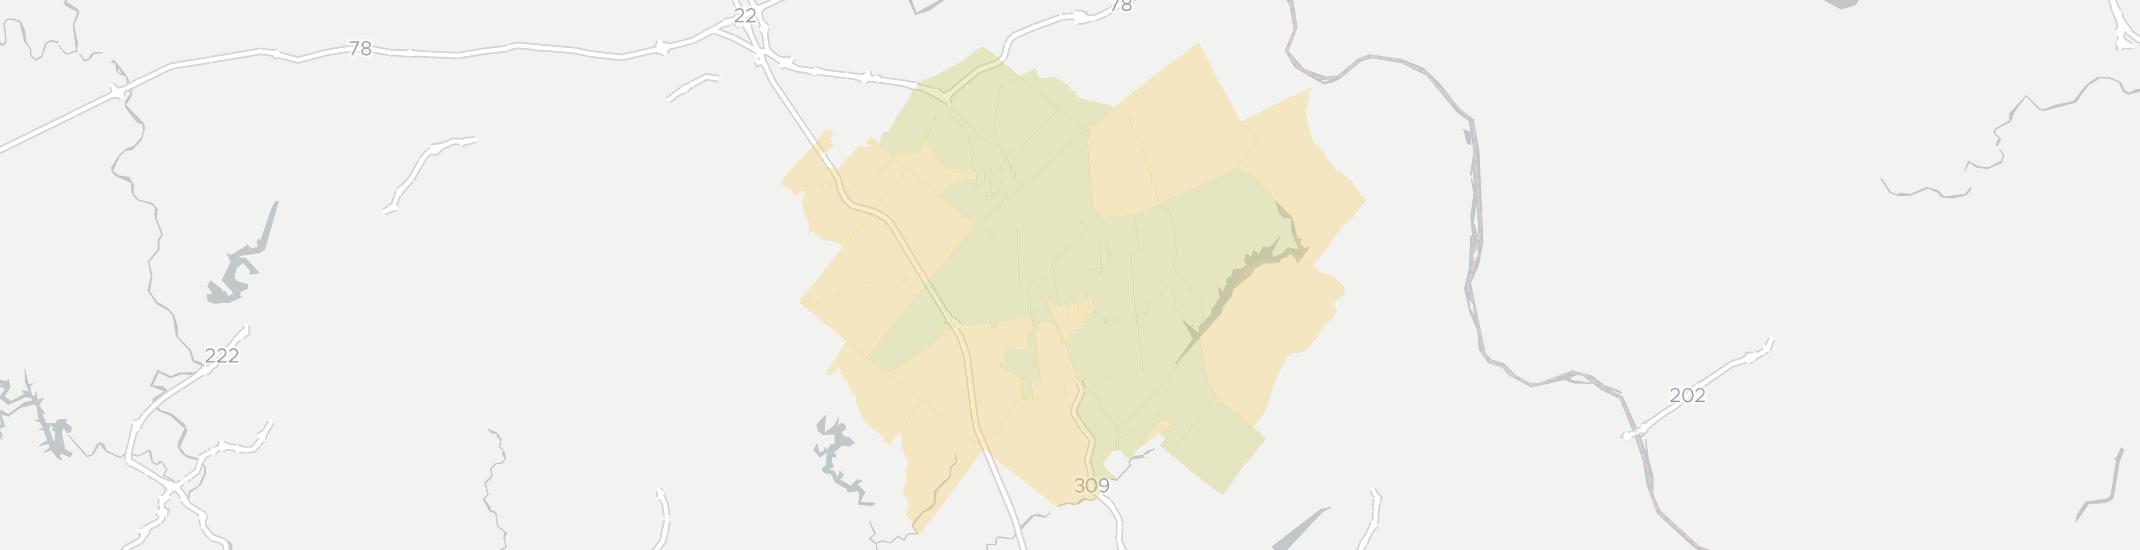 Quakertown Internet Competition Map. Click for interactive map